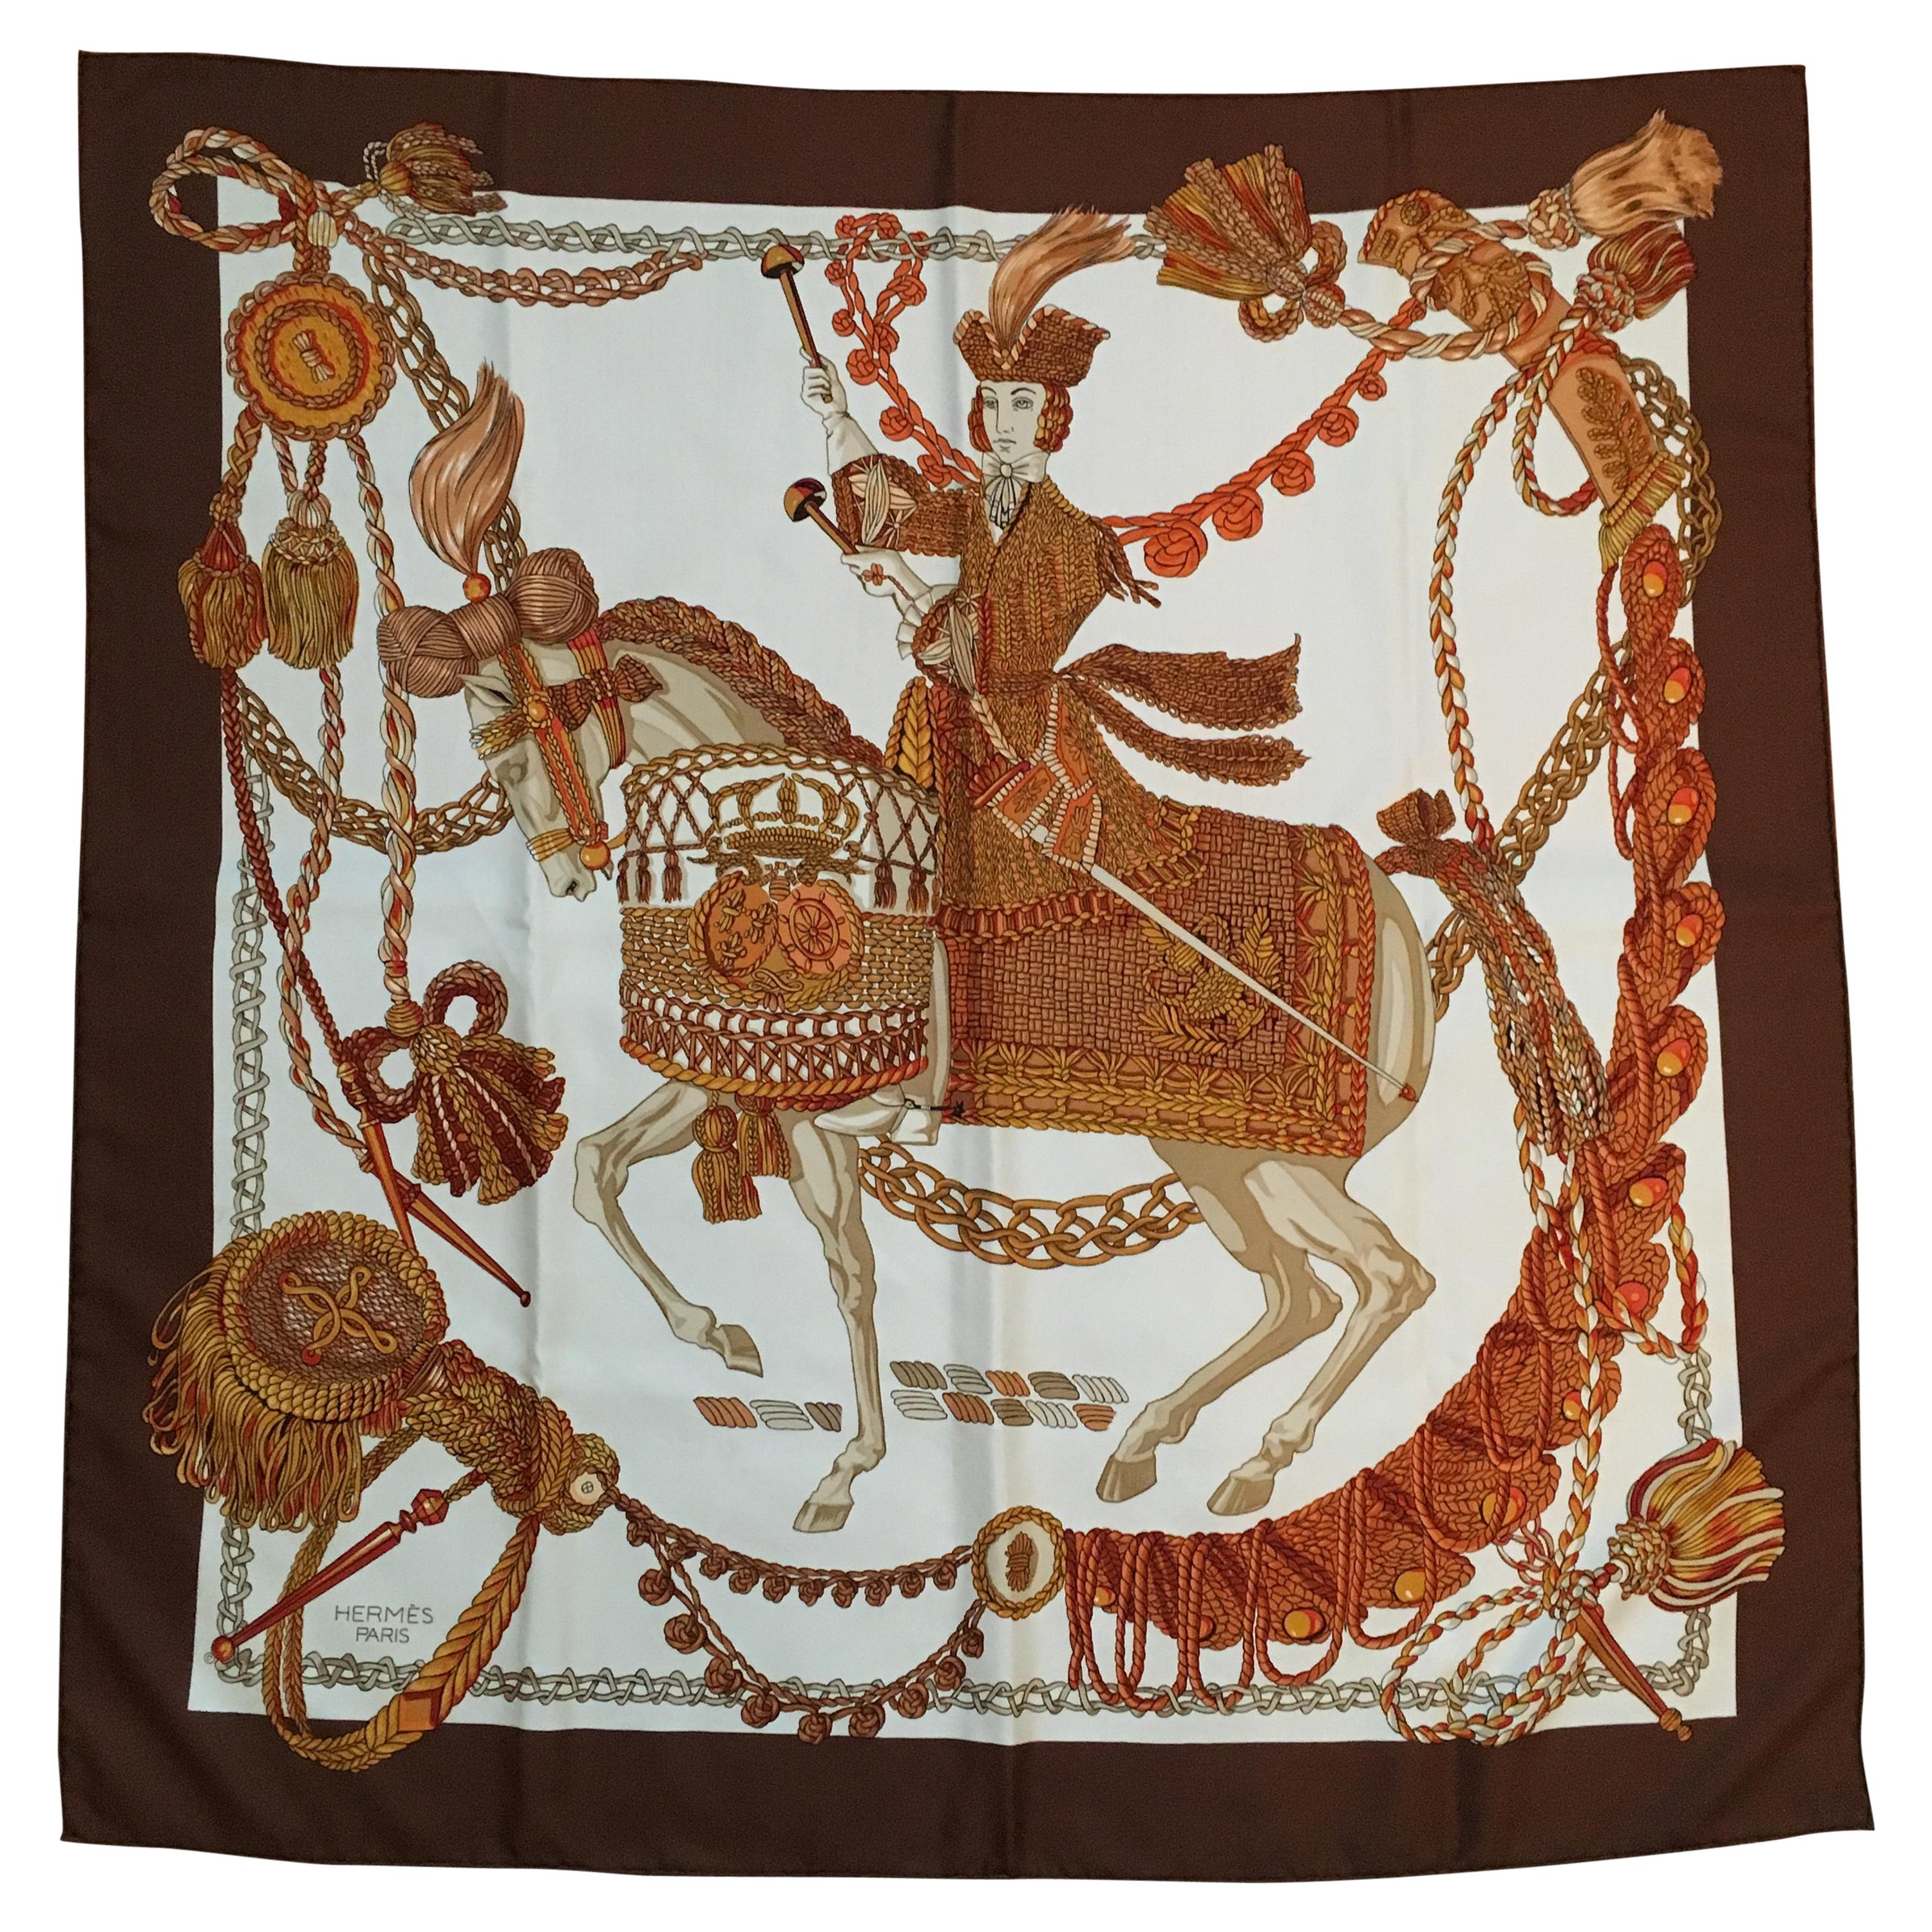 Hermes Scarf Le Timbalier by Francoise Heron 1961 in Box 90cm